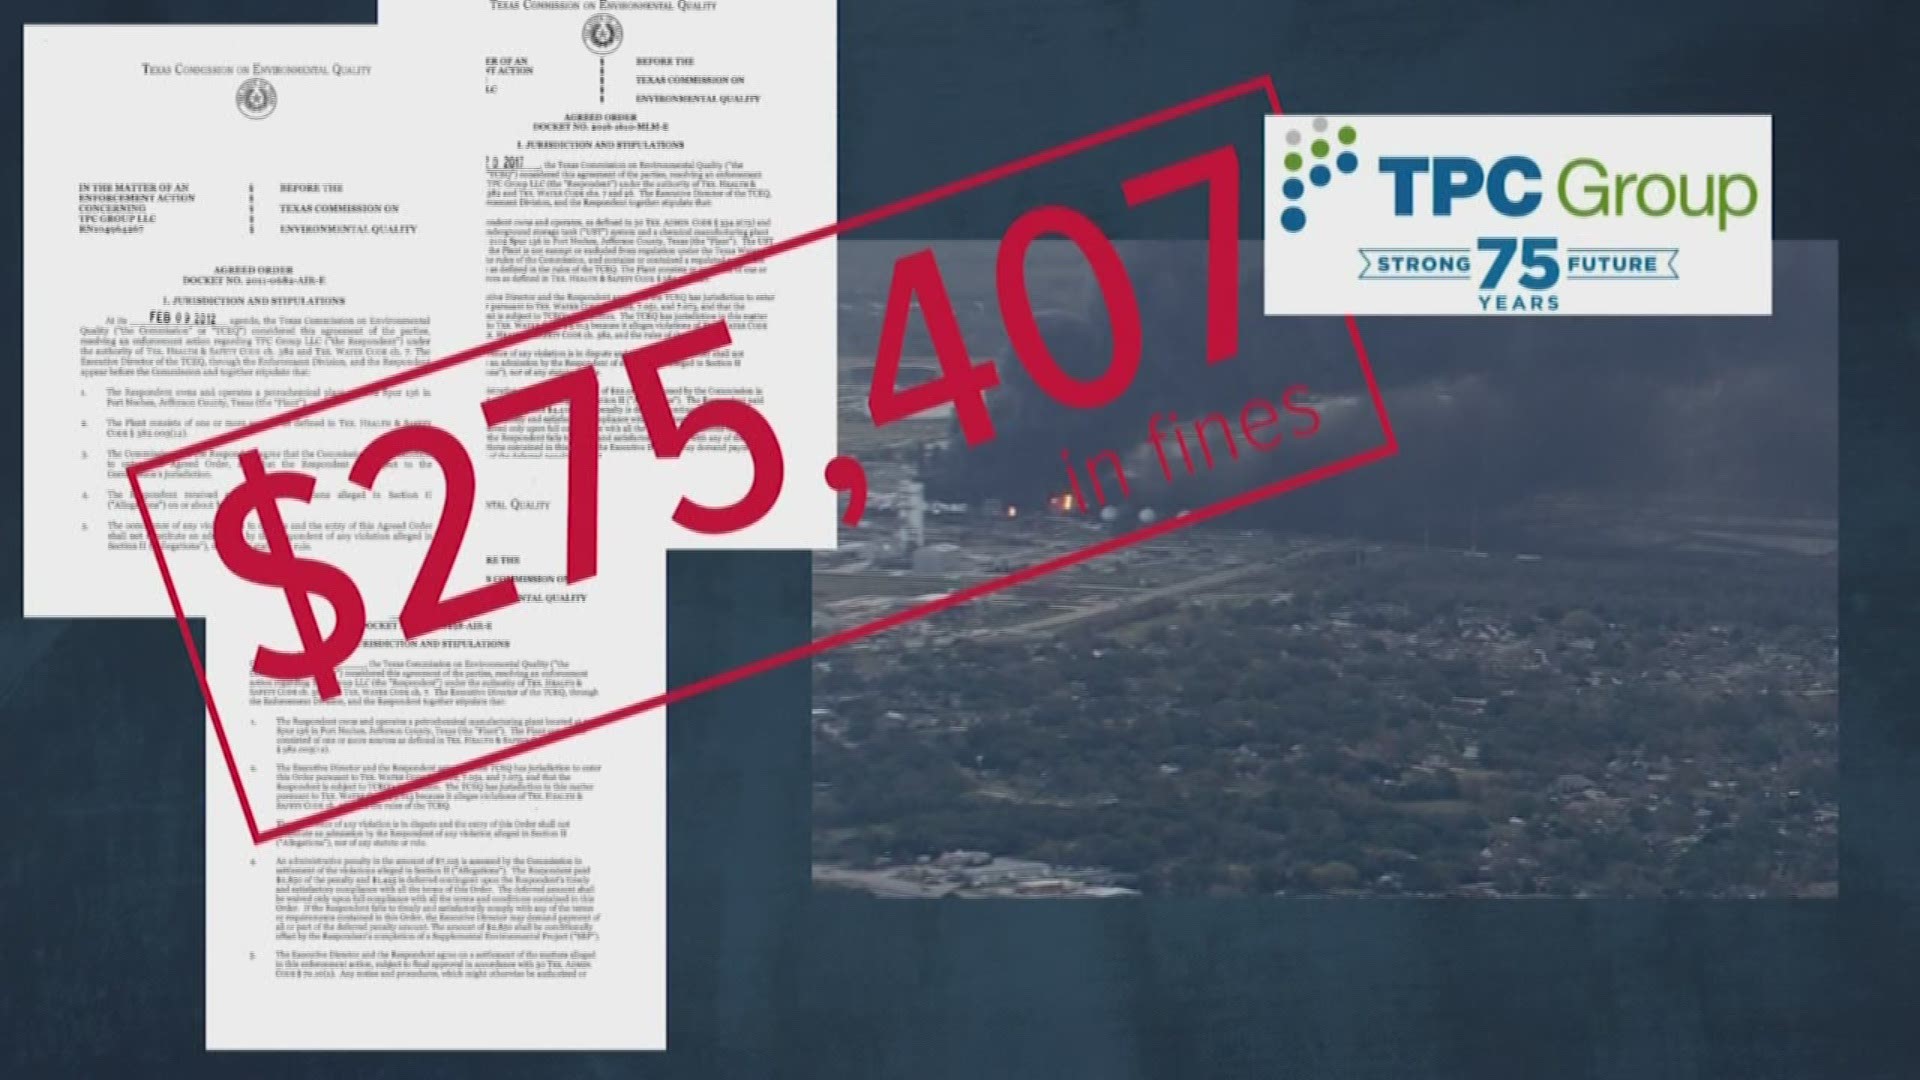 The TPC Group plant has a history of "poor maintenance" and "avoidable chemical releases," according to the TCEQ.